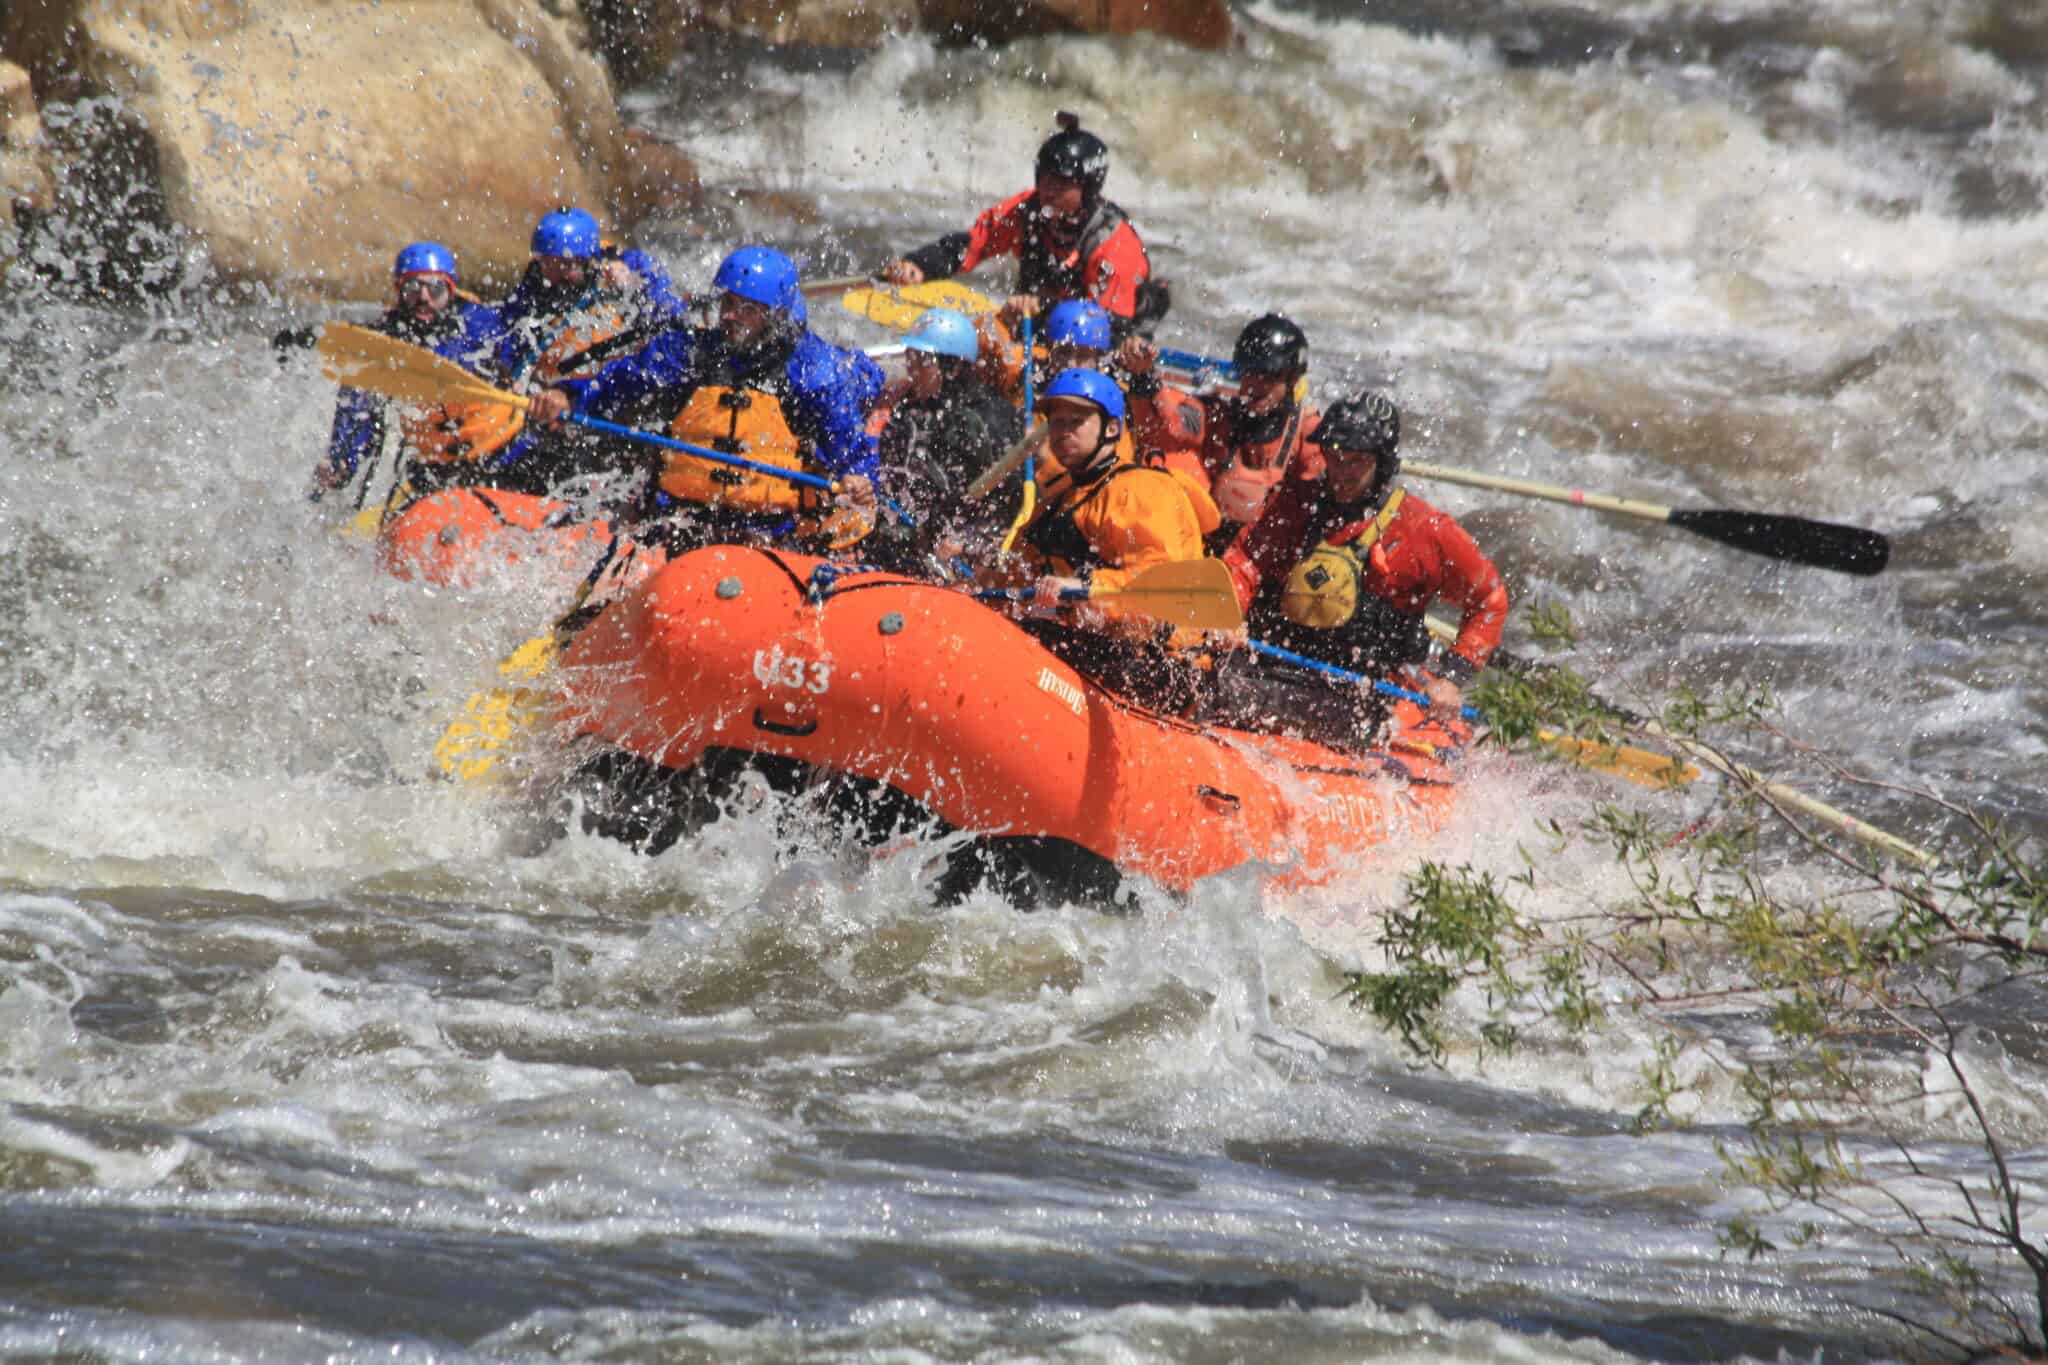 class iv rafting on the upper kern river